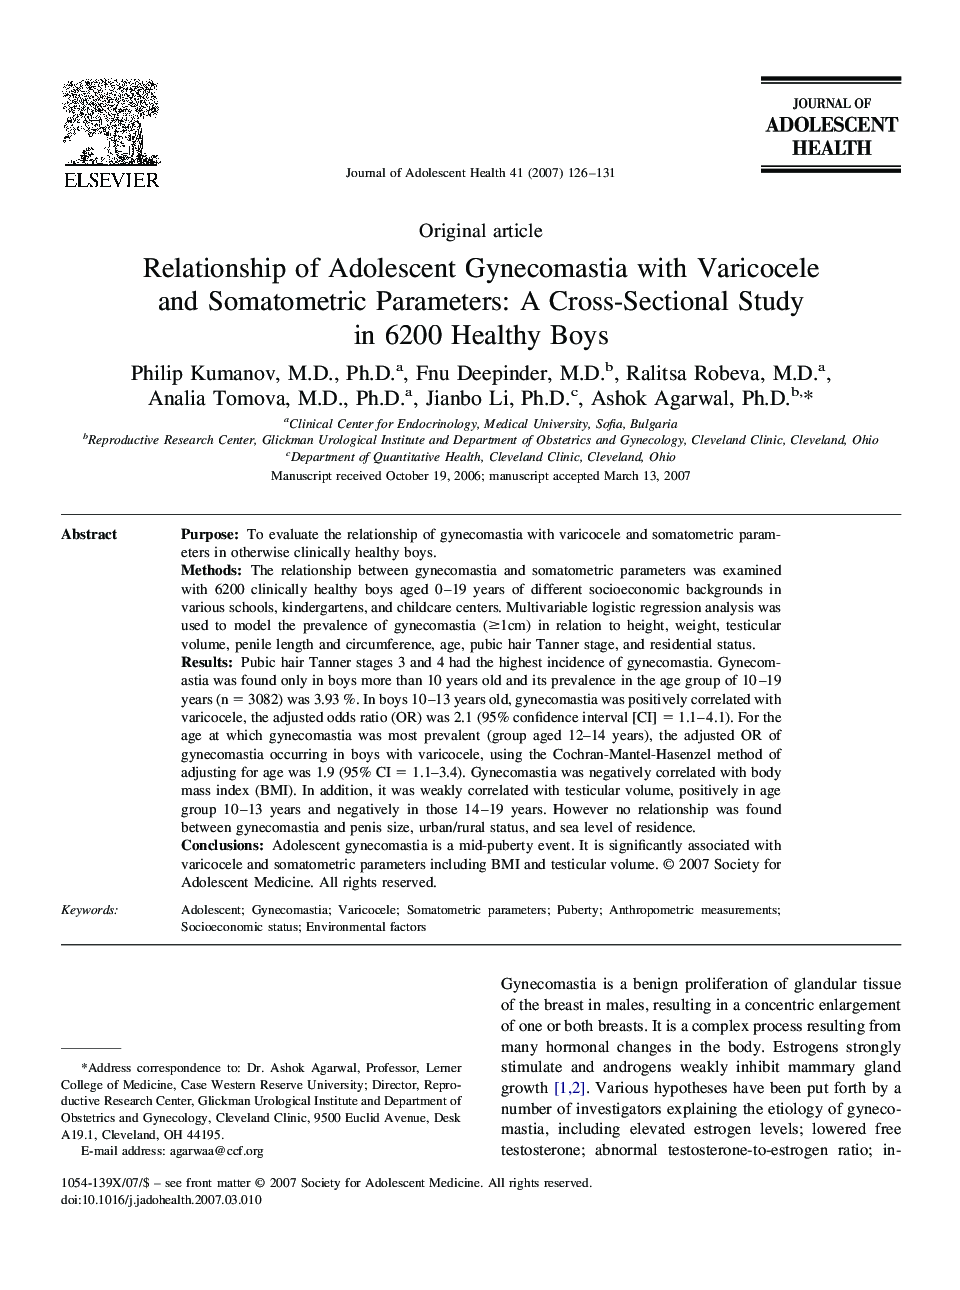 Relationship of Adolescent Gynecomastia with Varicocele and Somatometric Parameters: A Cross-Sectional Study in 6200 Healthy Boys